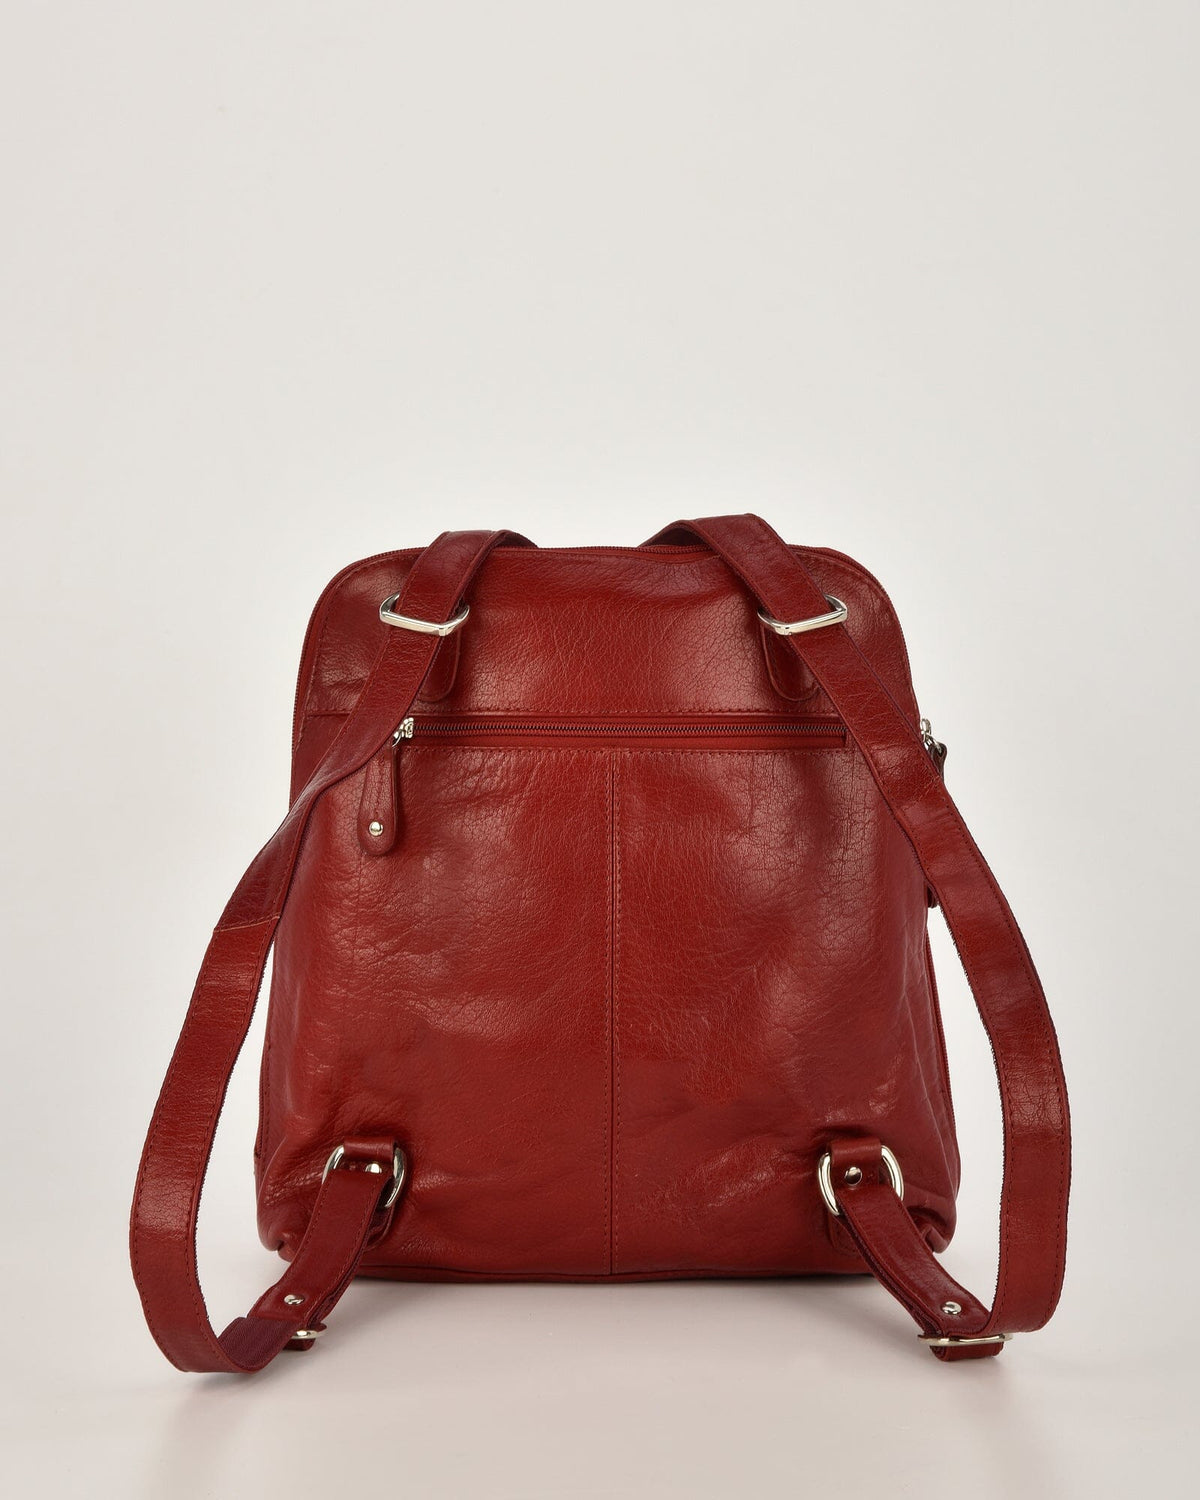 Poppy Leather 2 in 1 Convertible Backpack